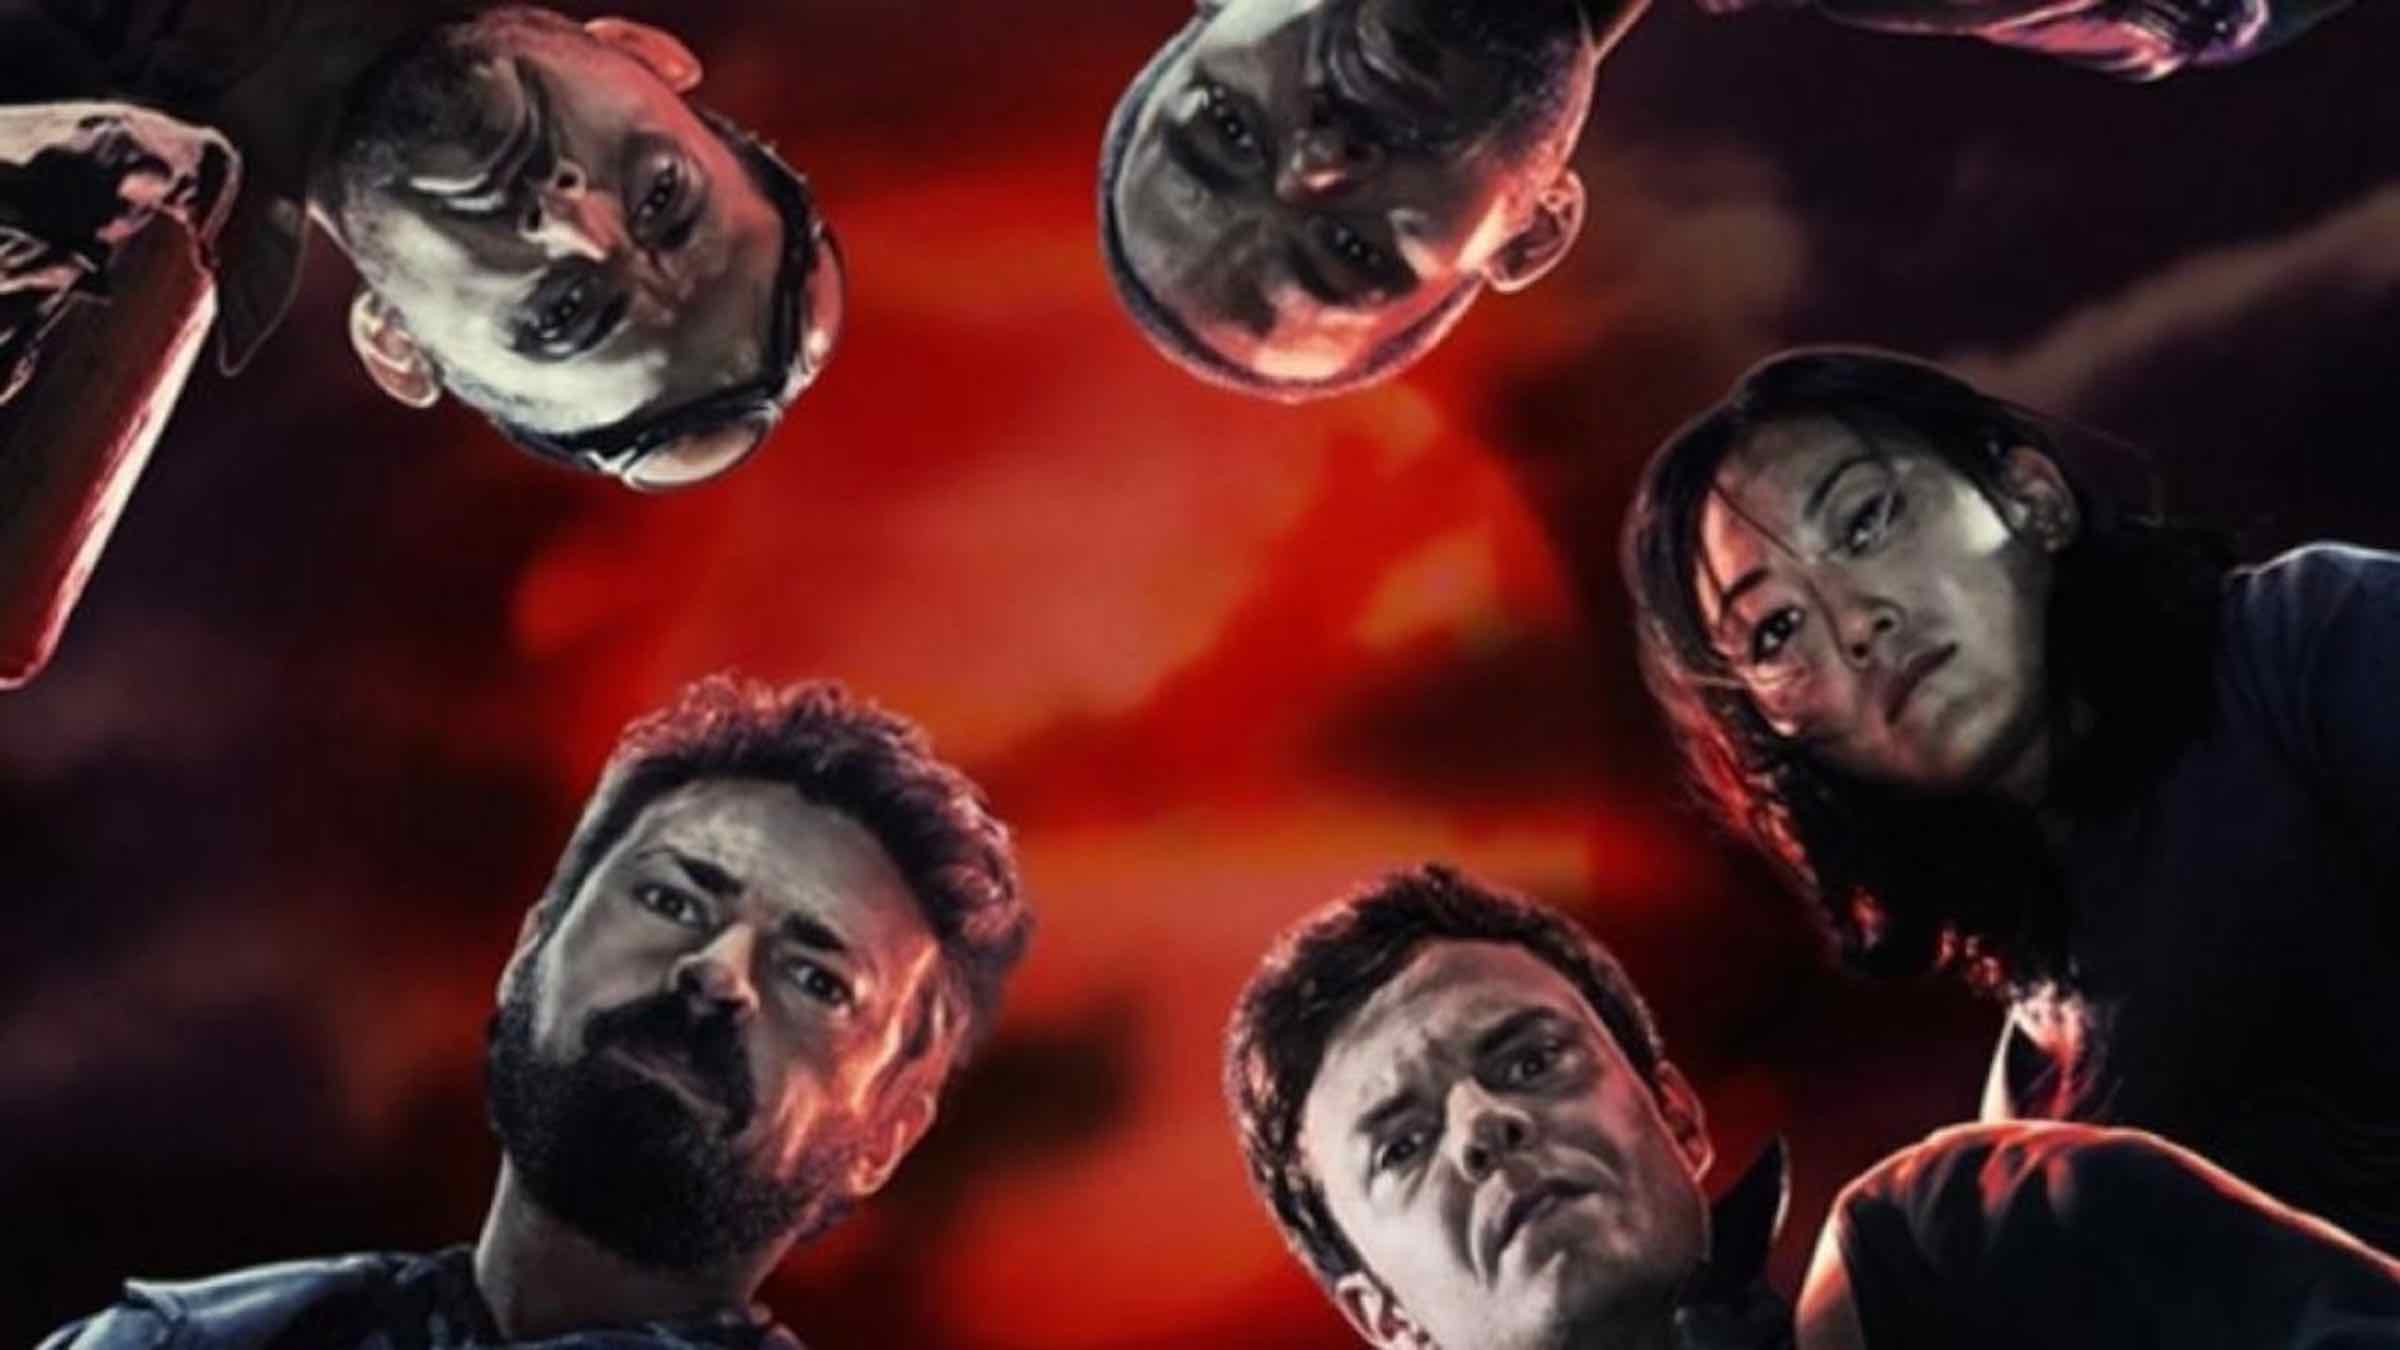 Amazon Studios's 'The Boys' S2 is on its way as fast as a speeding bullet (every pun very much intended). Here’s everything Film Daily knows so far.